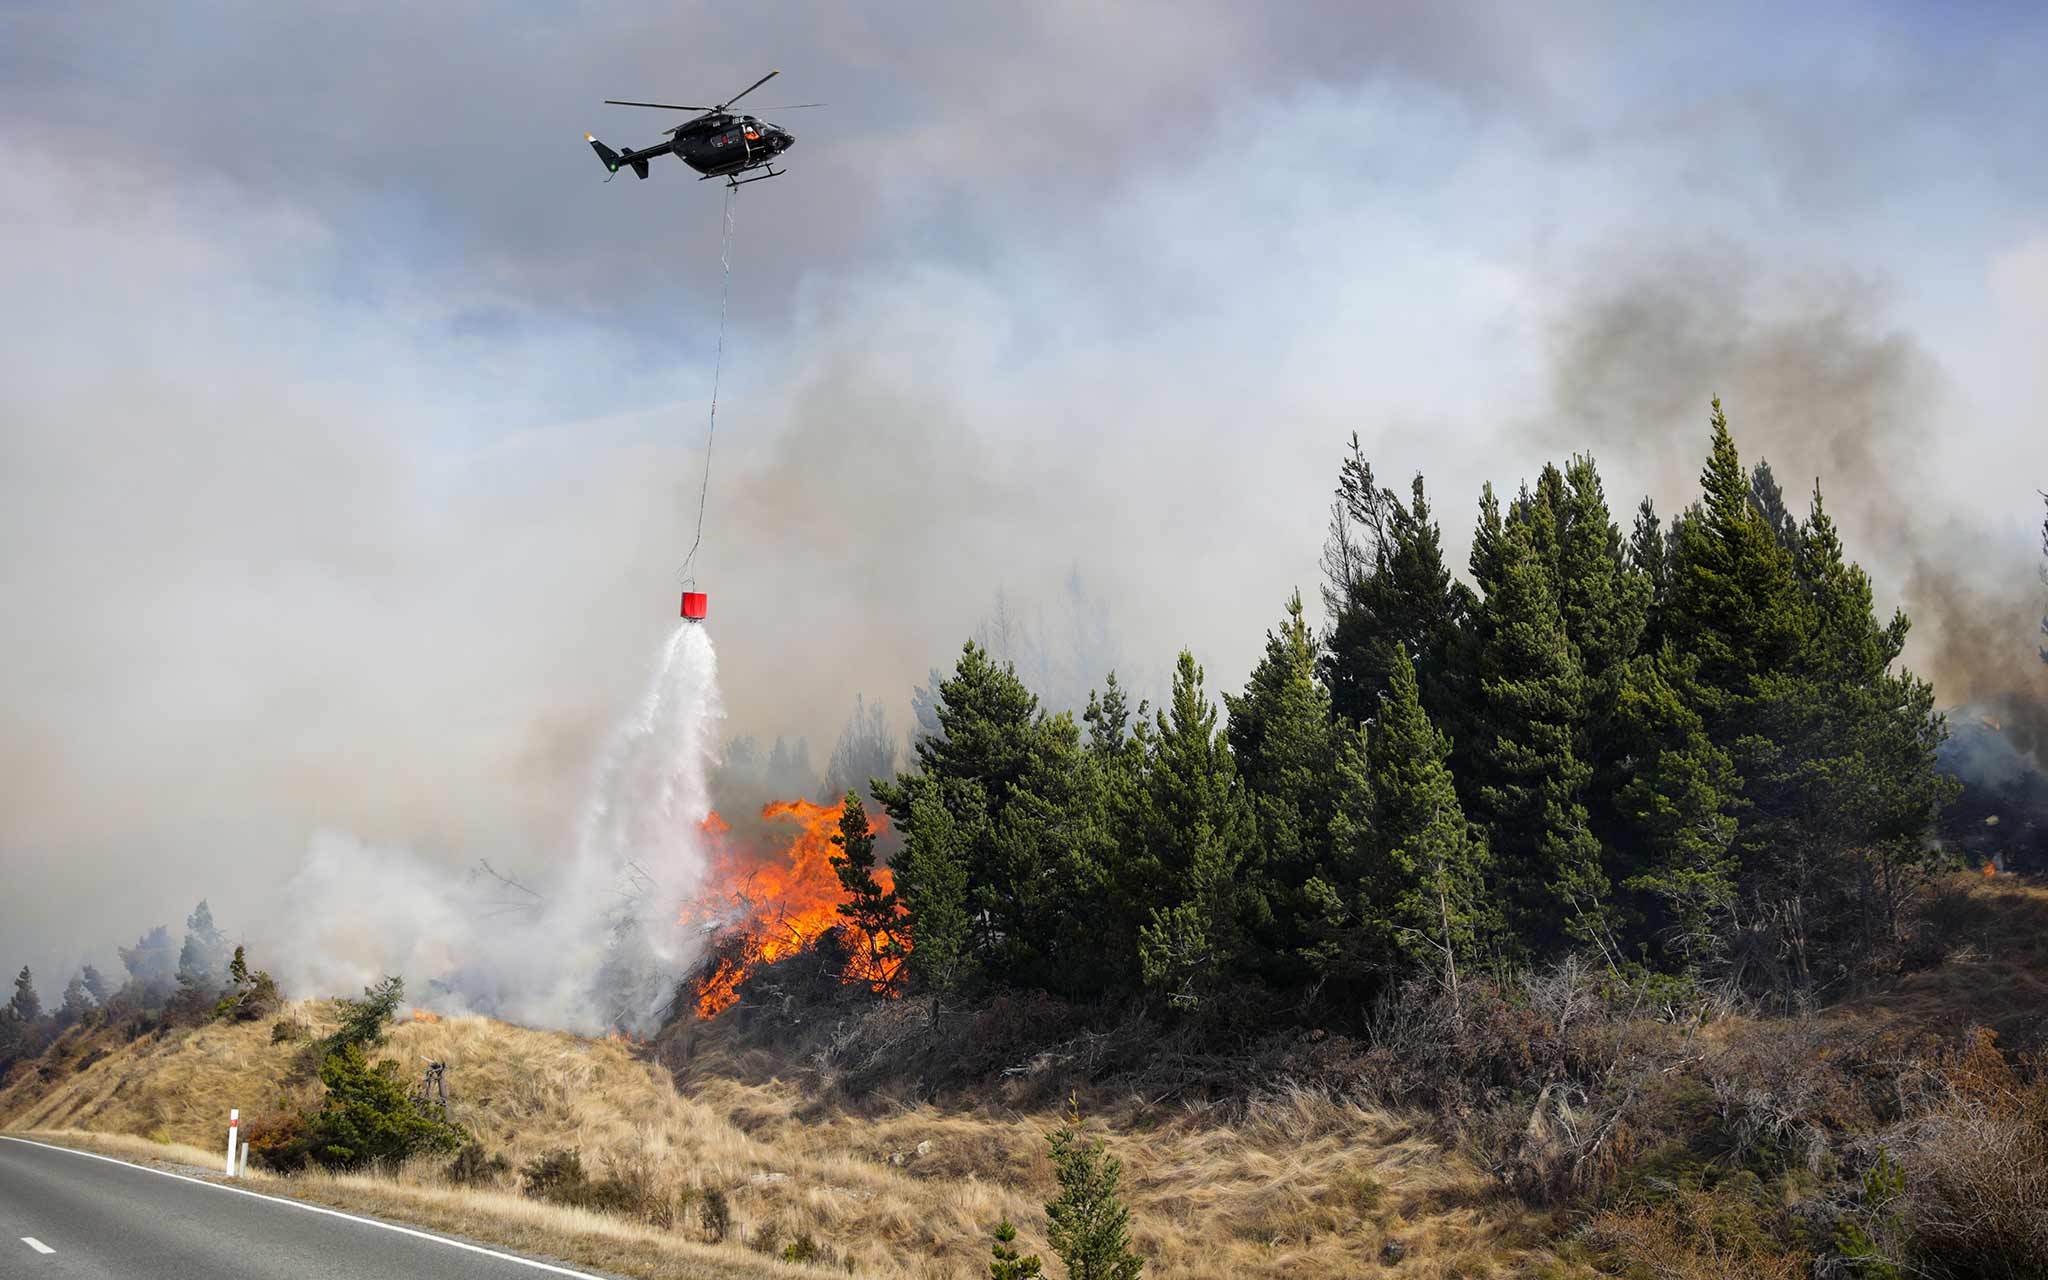 Photo of a helicopter dropping water on a fire in some tress next to a road.